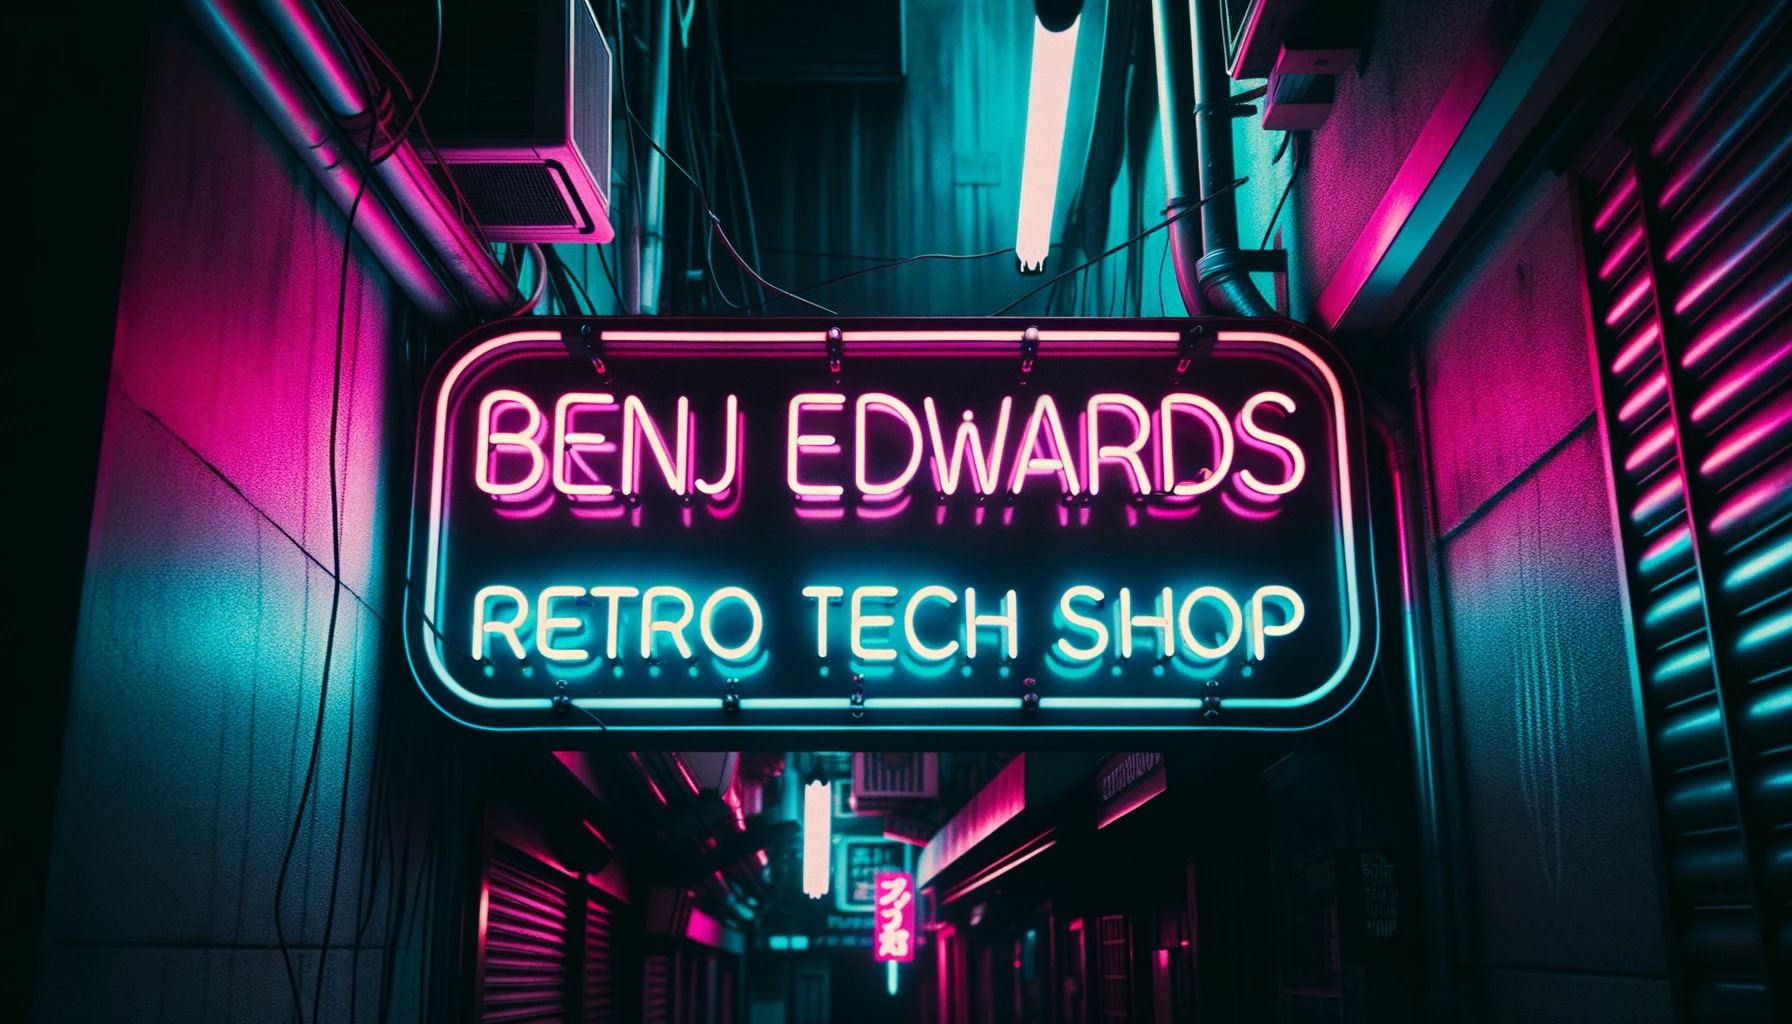 An AI-generated image of a neon shop sign created by DALL-E 3.